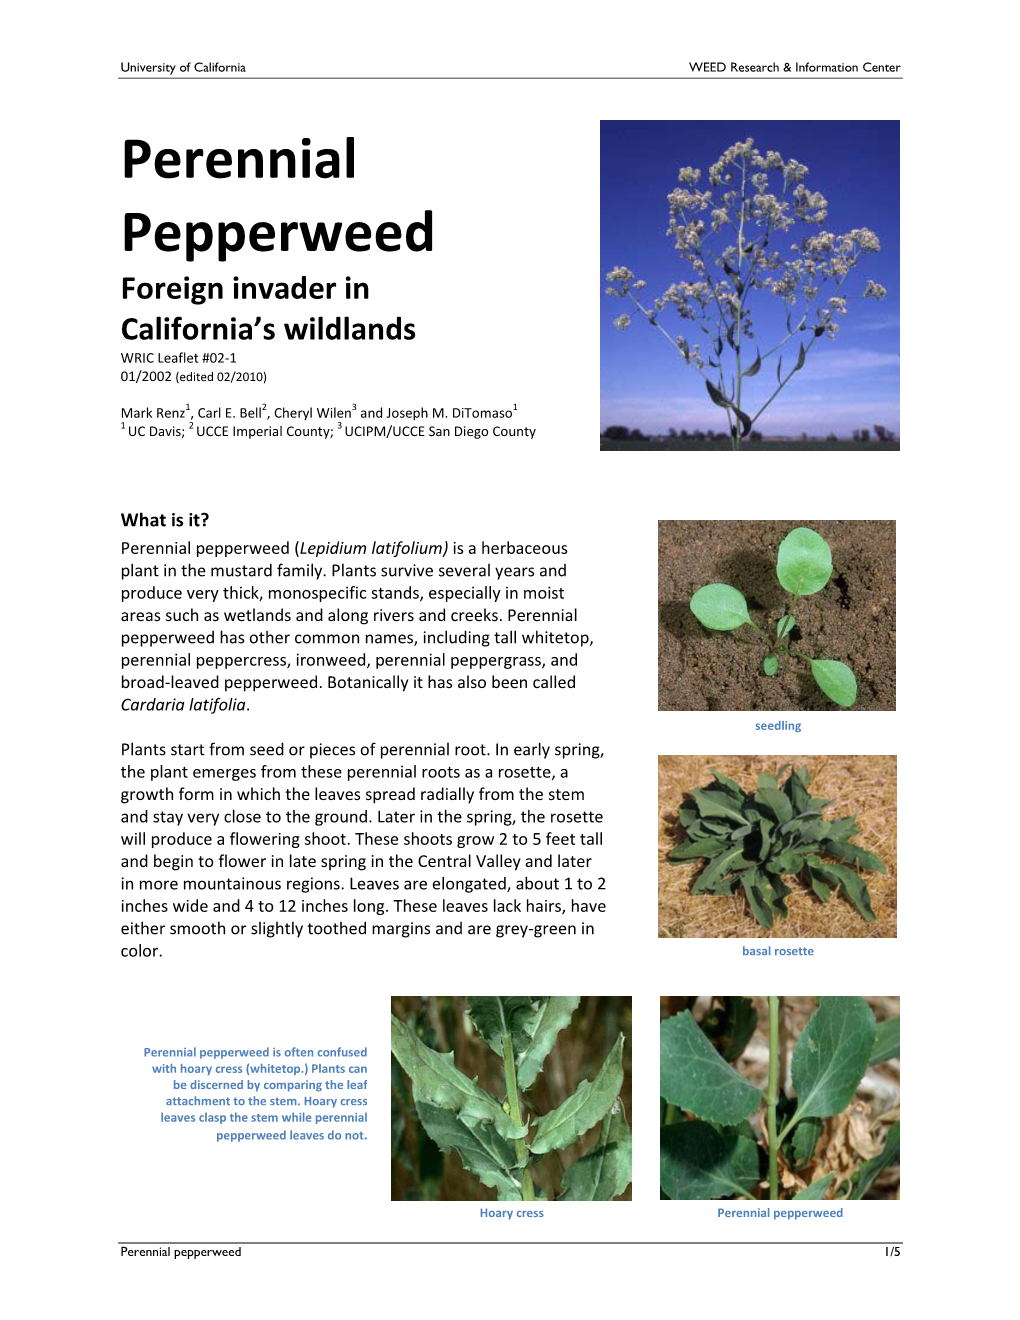 Perennial Pepperweed Foreign Invader in California’S Wildlands WRIC Leaflet #02-1 01/2002 (Edited 02/2010)